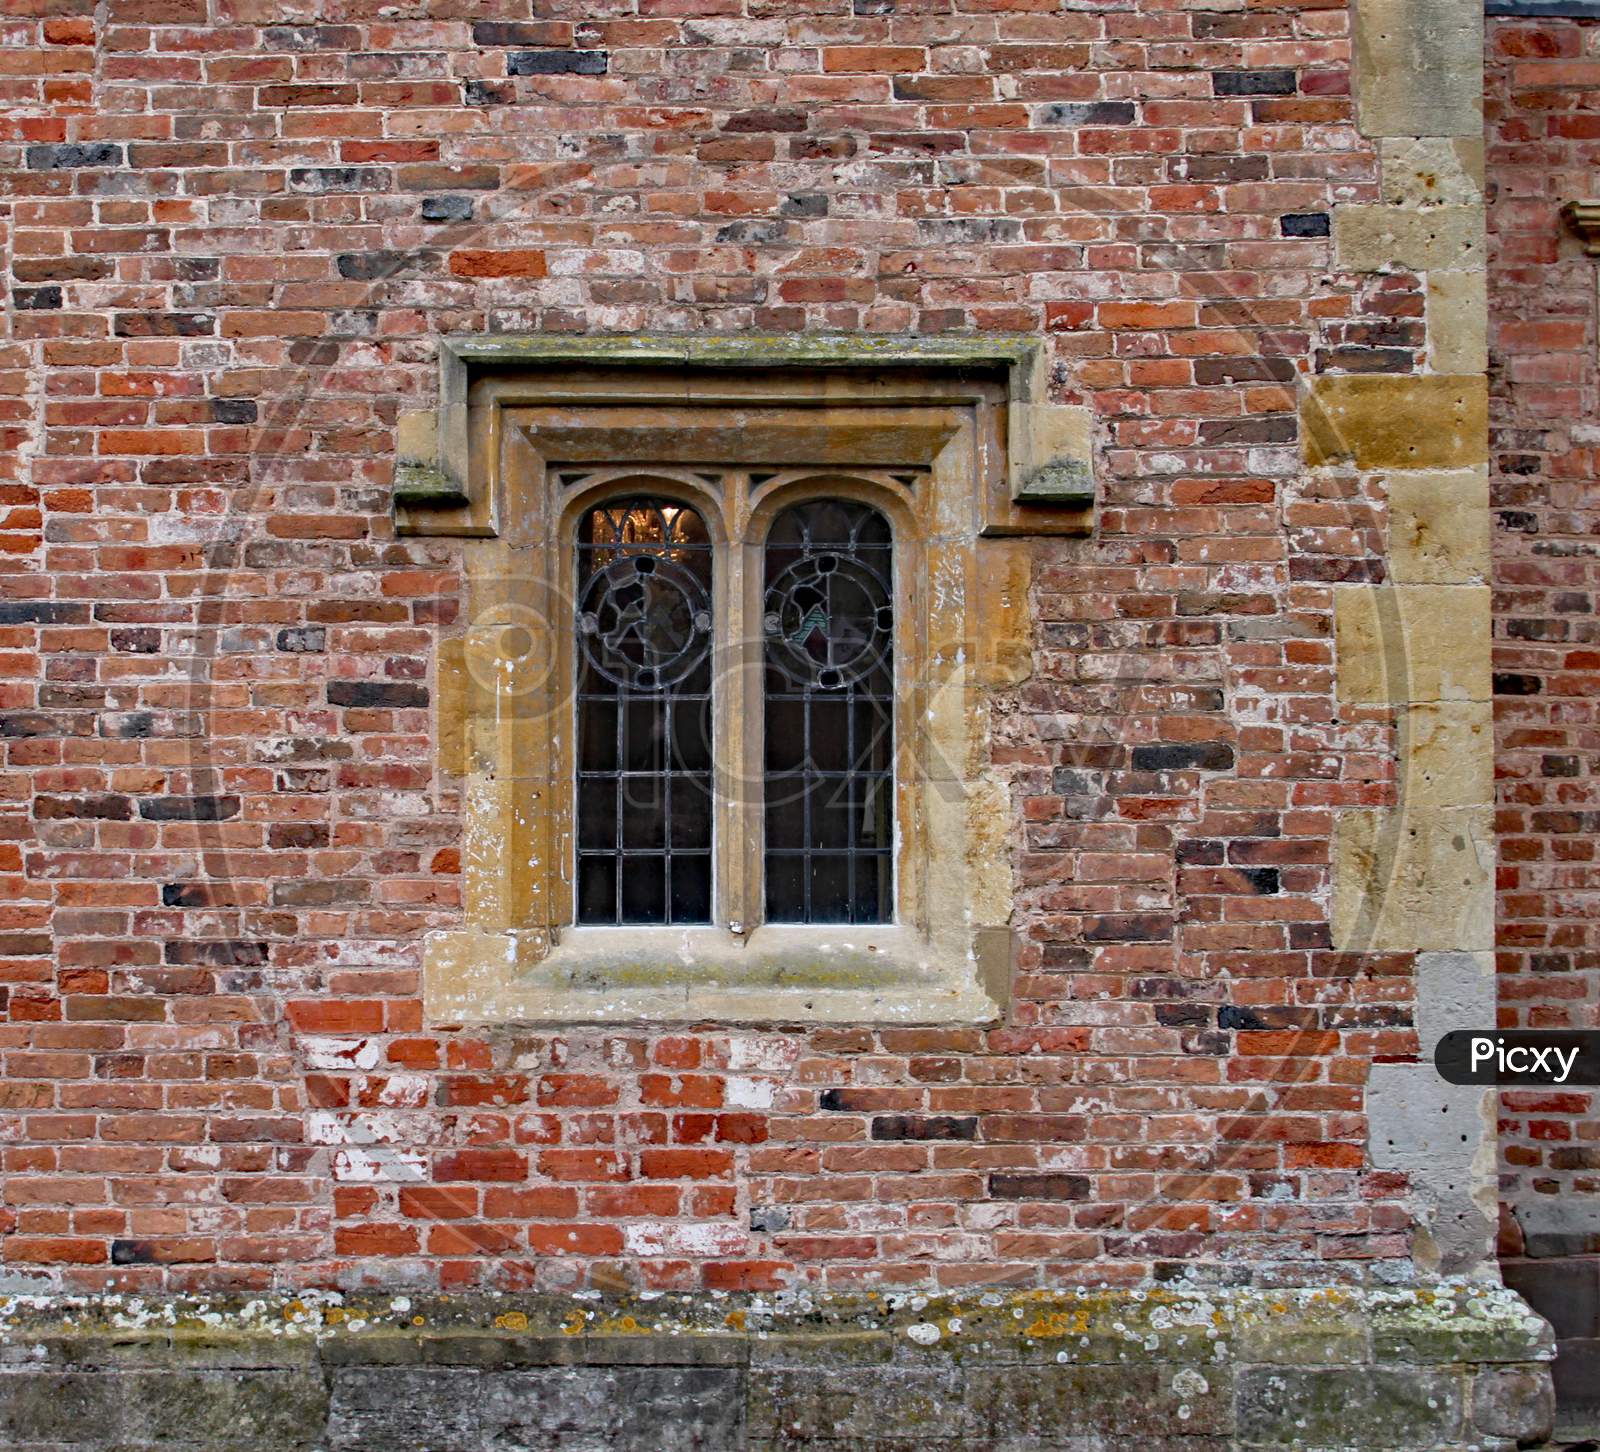 Old Ornate Concrete Window With Stained Glass In A Weathered Brick Wall In An Old Manor House